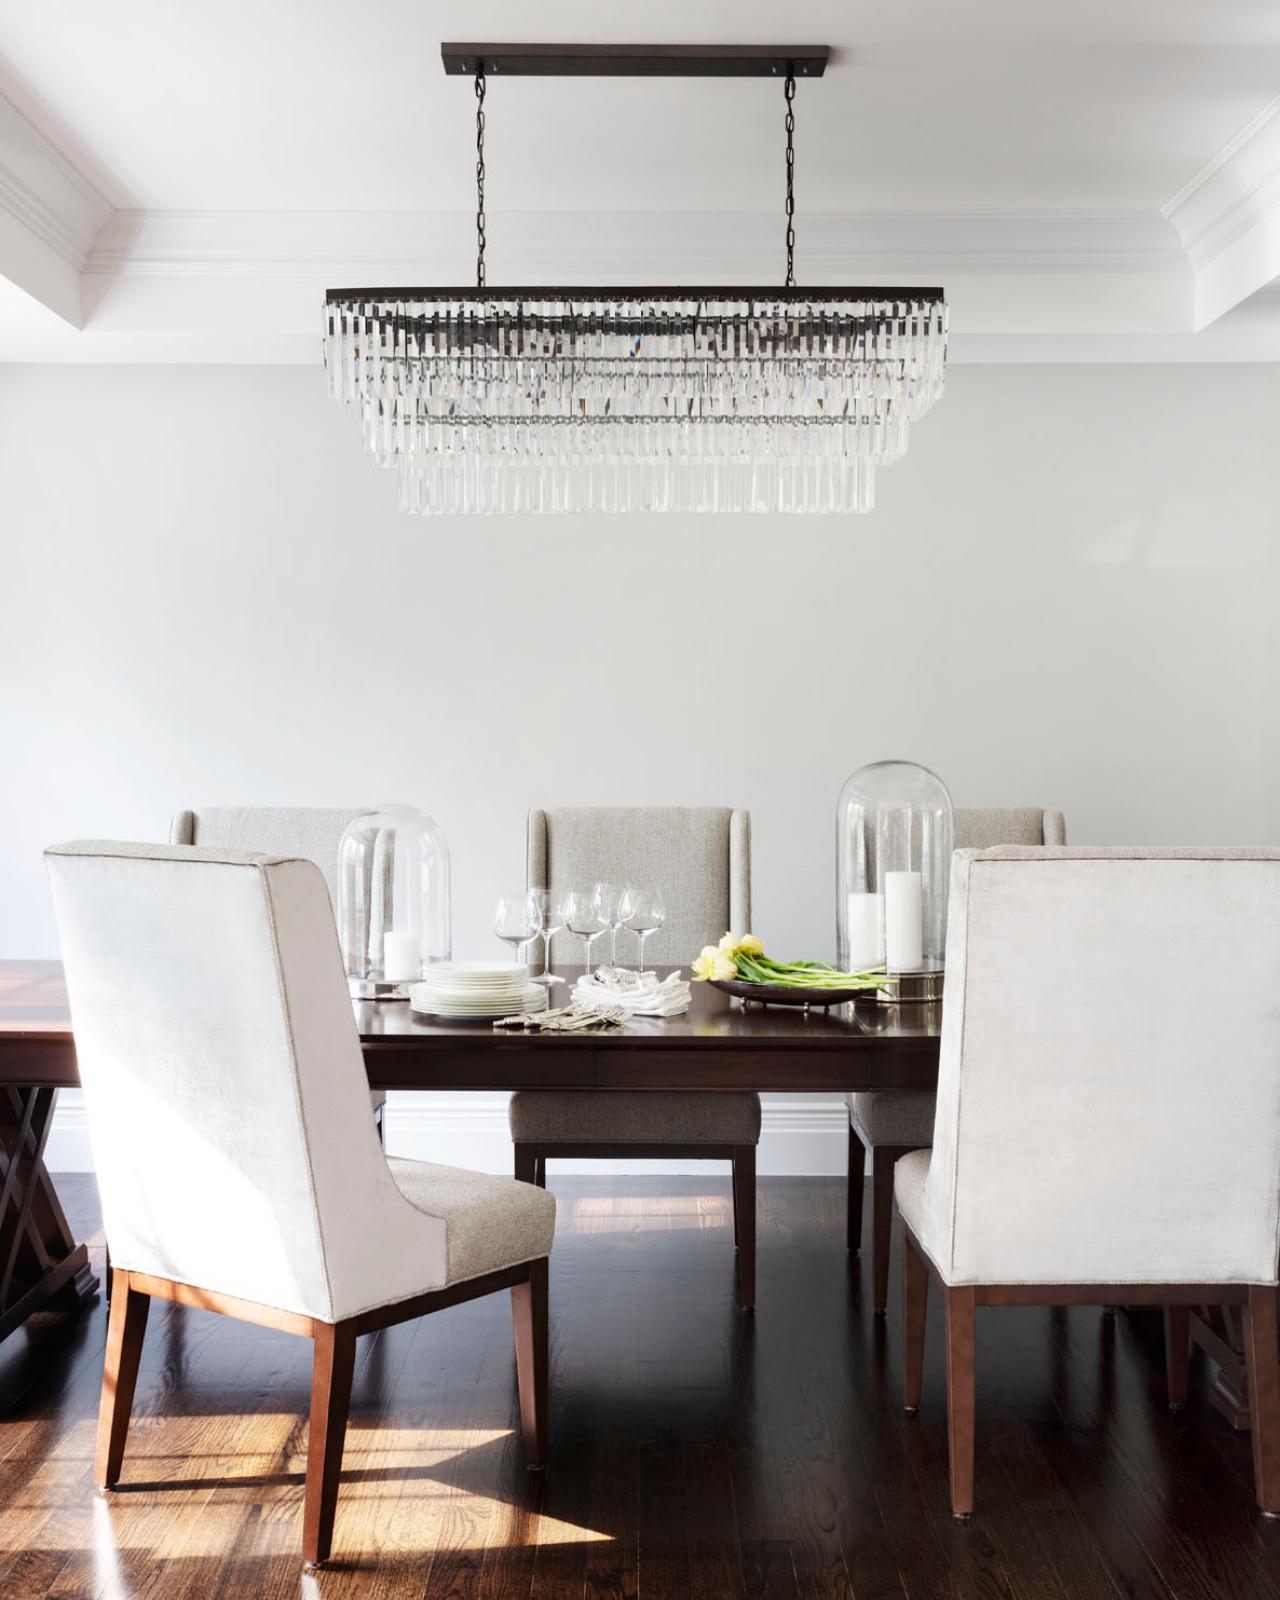 How To Choose Dining Room Lighting, Pendant Lights Over Dining Room Table